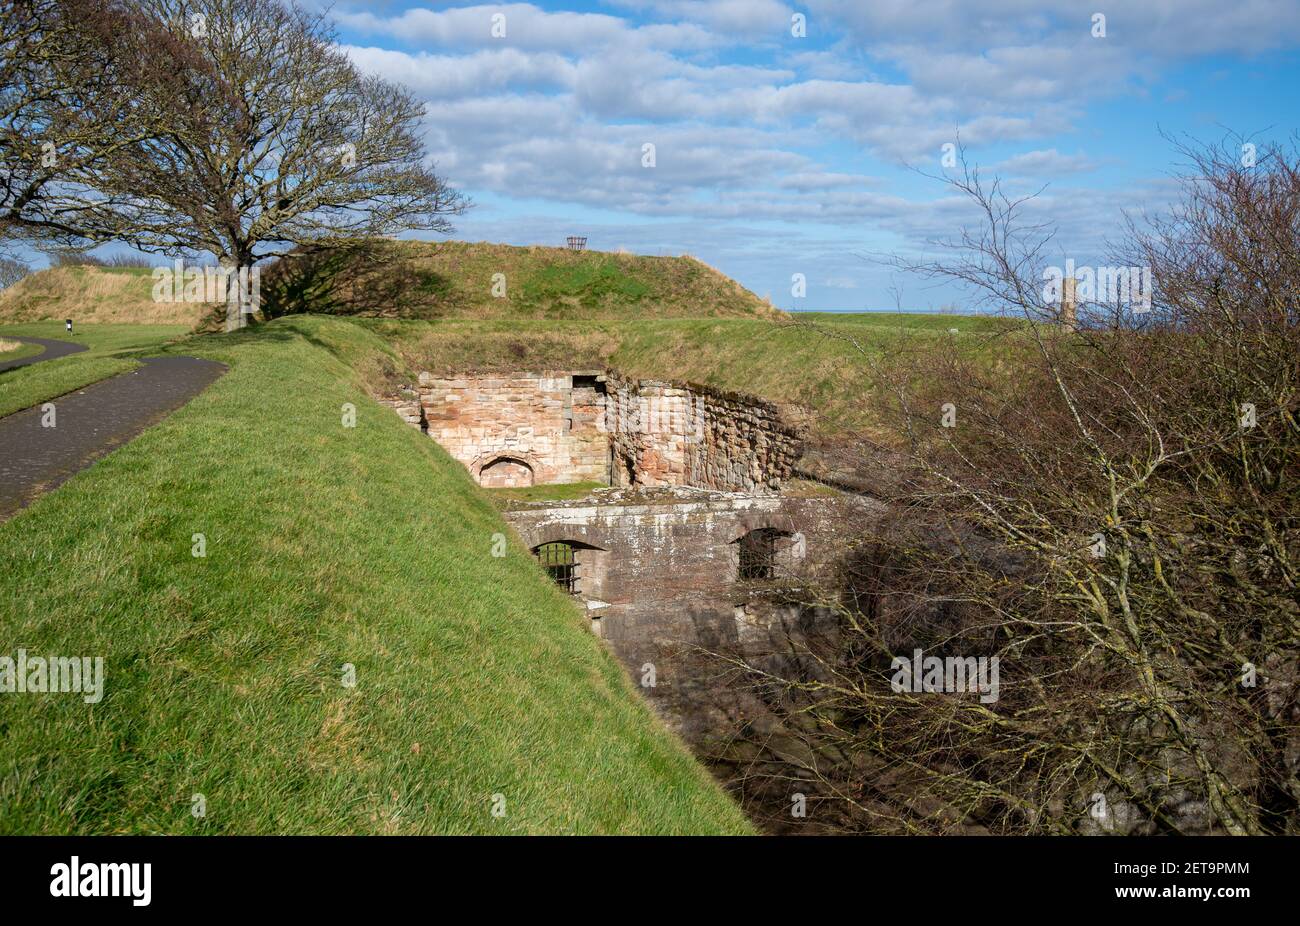 The Elizabethan town walls that surround Englands most northerly town, Berwick upon Tweed, Northumberland, England, UK Stock Photo